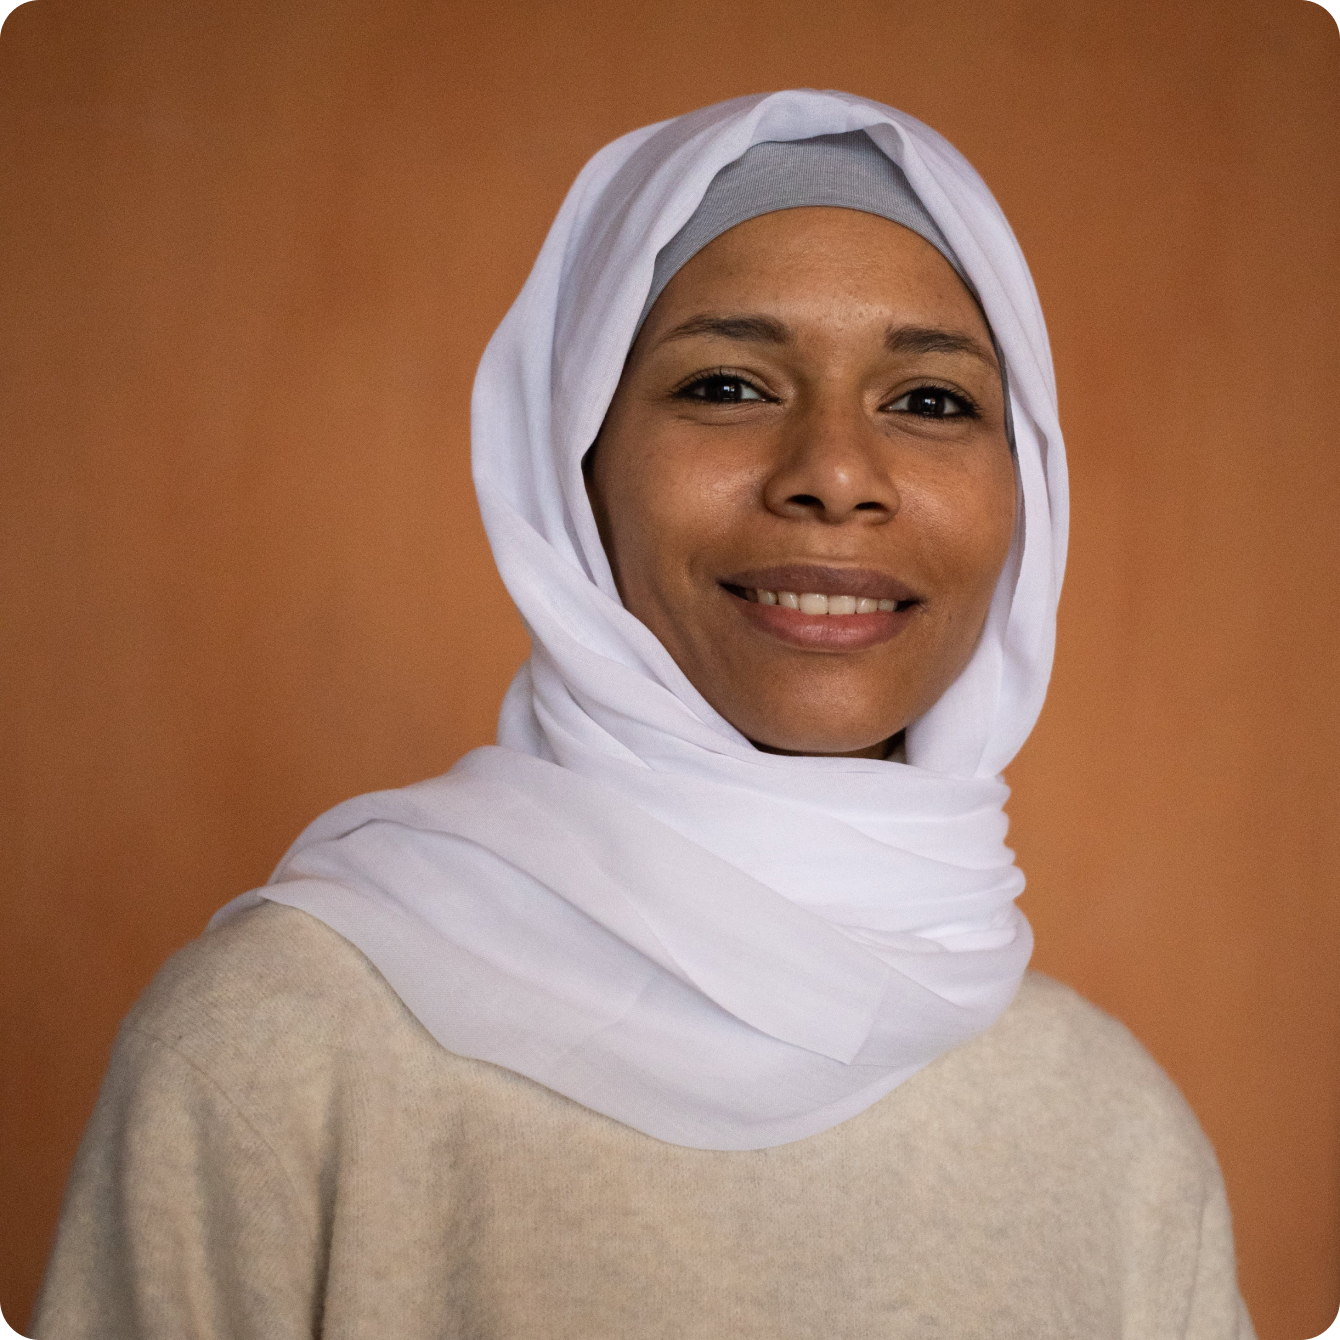 A person wearing a white hijab and a beige top against an orange background.